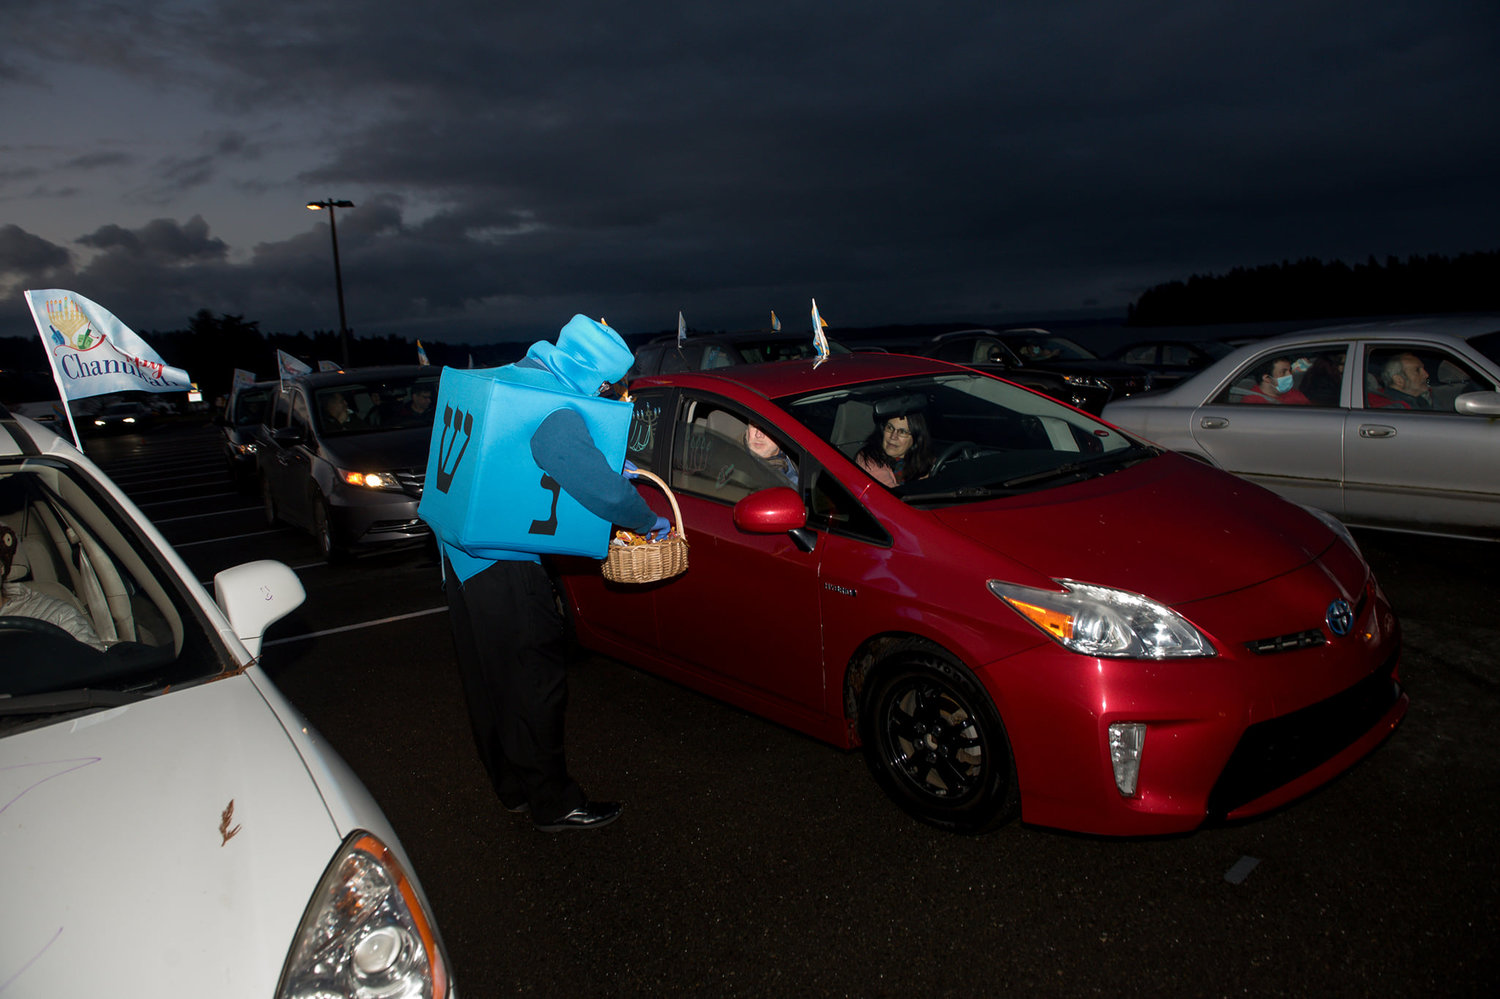 The Dreidel Man traveled from car to car giving chocolate "gelt" candy to participants at the 2020 Chanukah menorah lighting at the Swantown Marina parking lot.